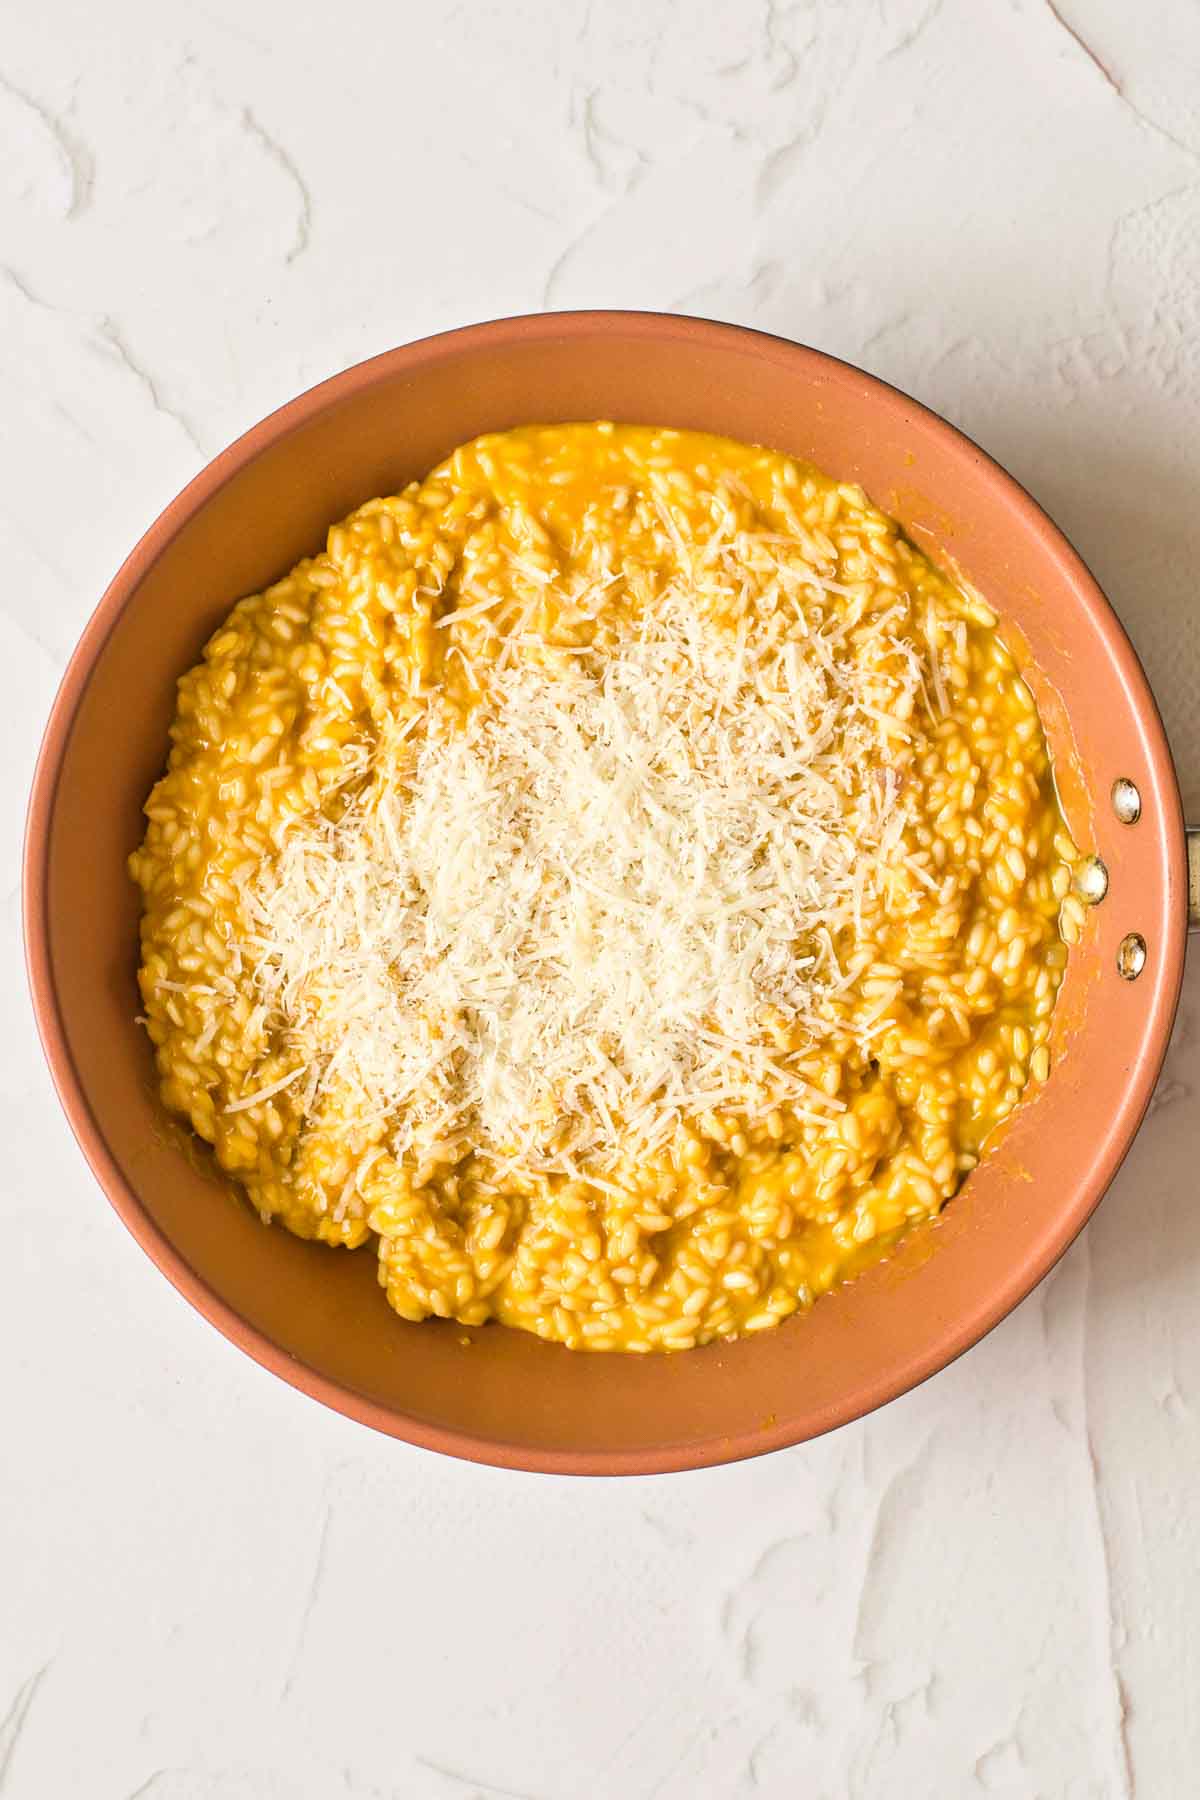 A big shallow bowl full of light-orange-colored pumpkin risotto. It is topped with a generous amount of Parmigiano Reggiano cheese.